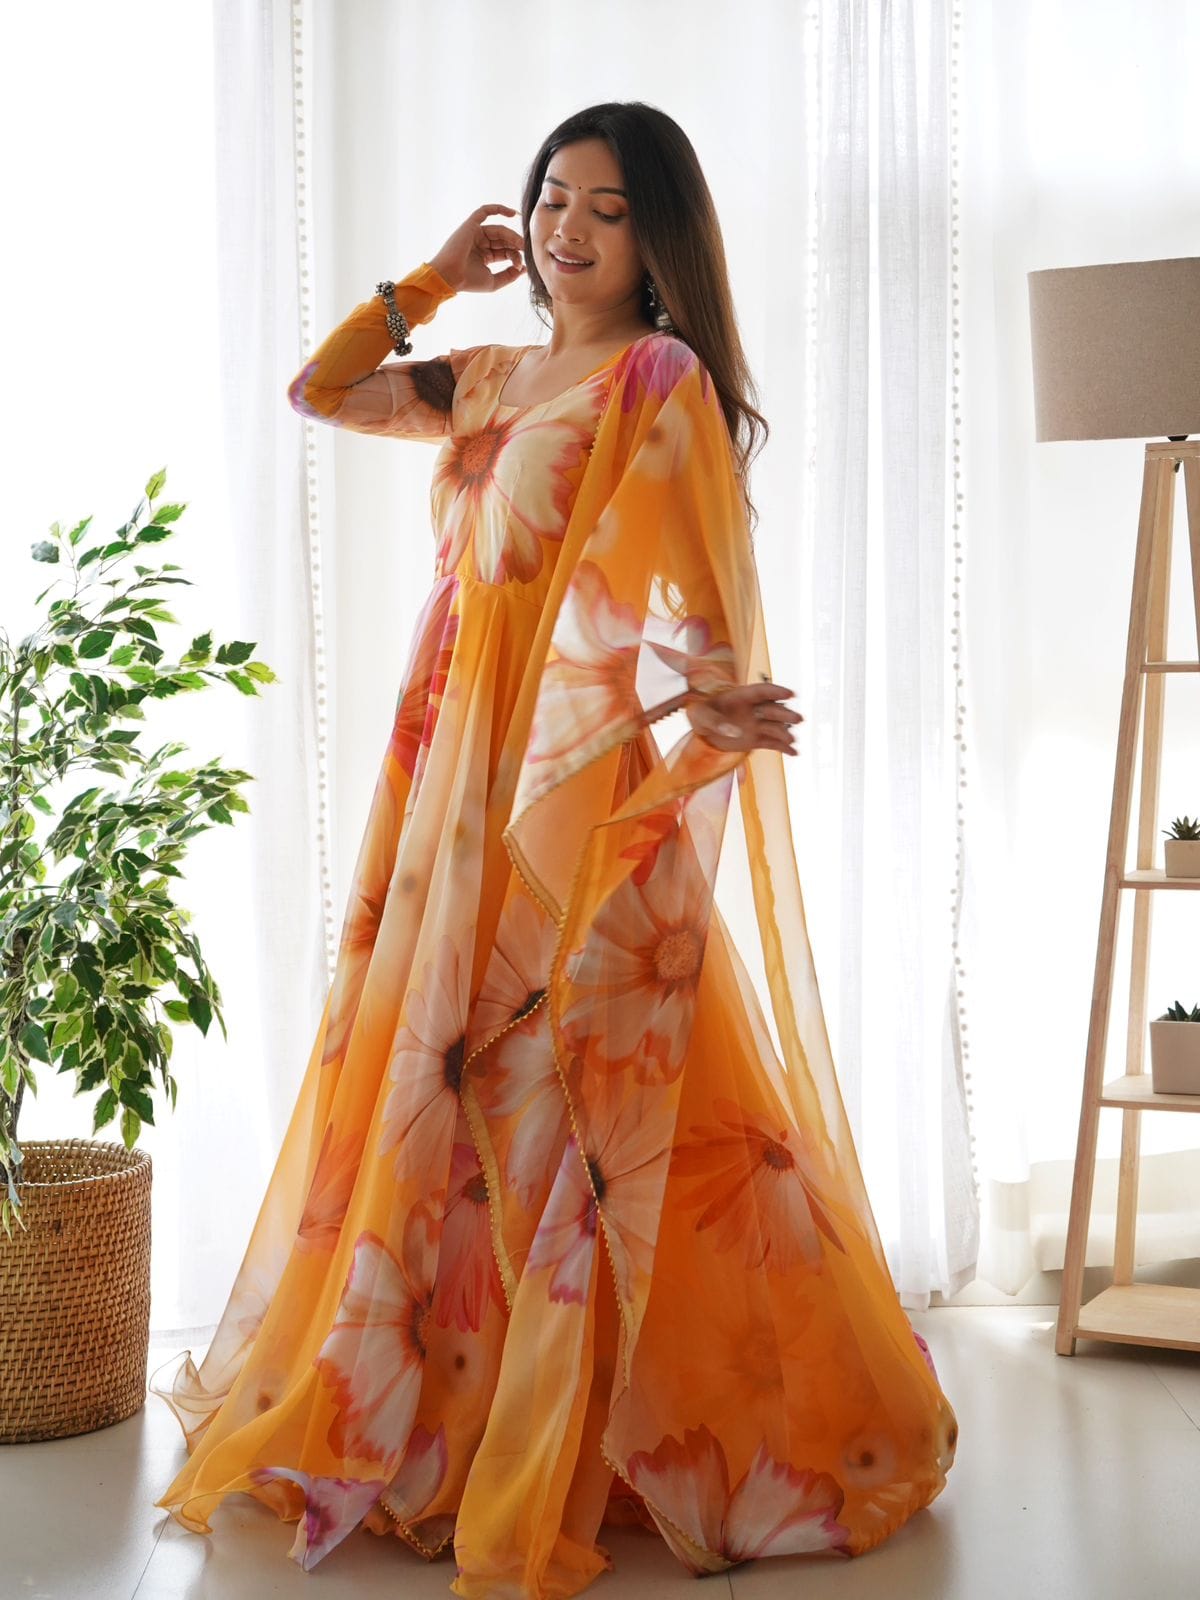 YELLOW PREMIUM QUALITY ORGANZA GOWN WITH BEAUTIFUL FLOWER PRINT & DUPTTA